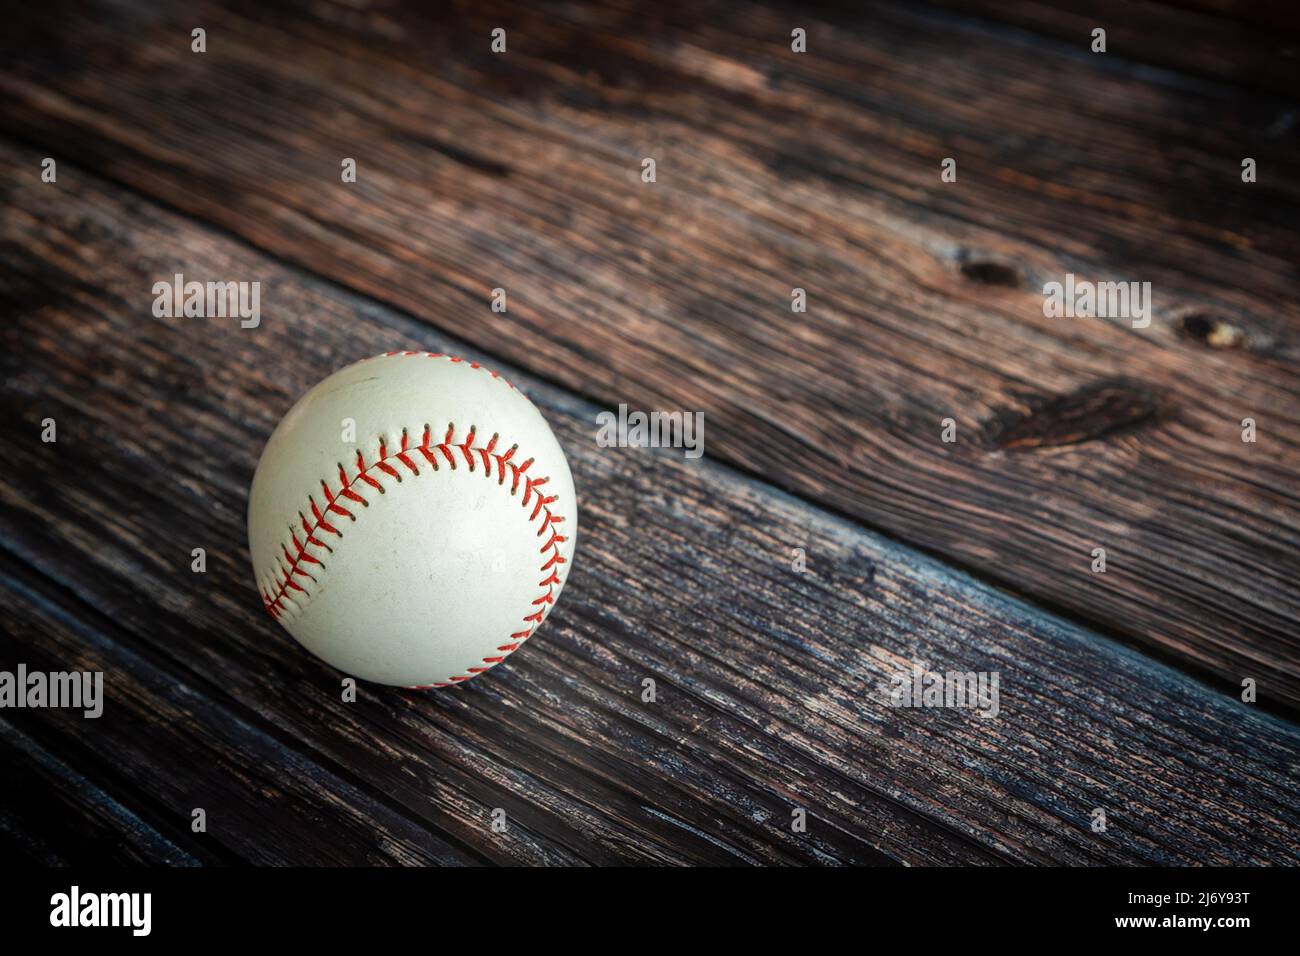 Leather baseball or softball ball on rustic wooden background with copy space. Stock Photo